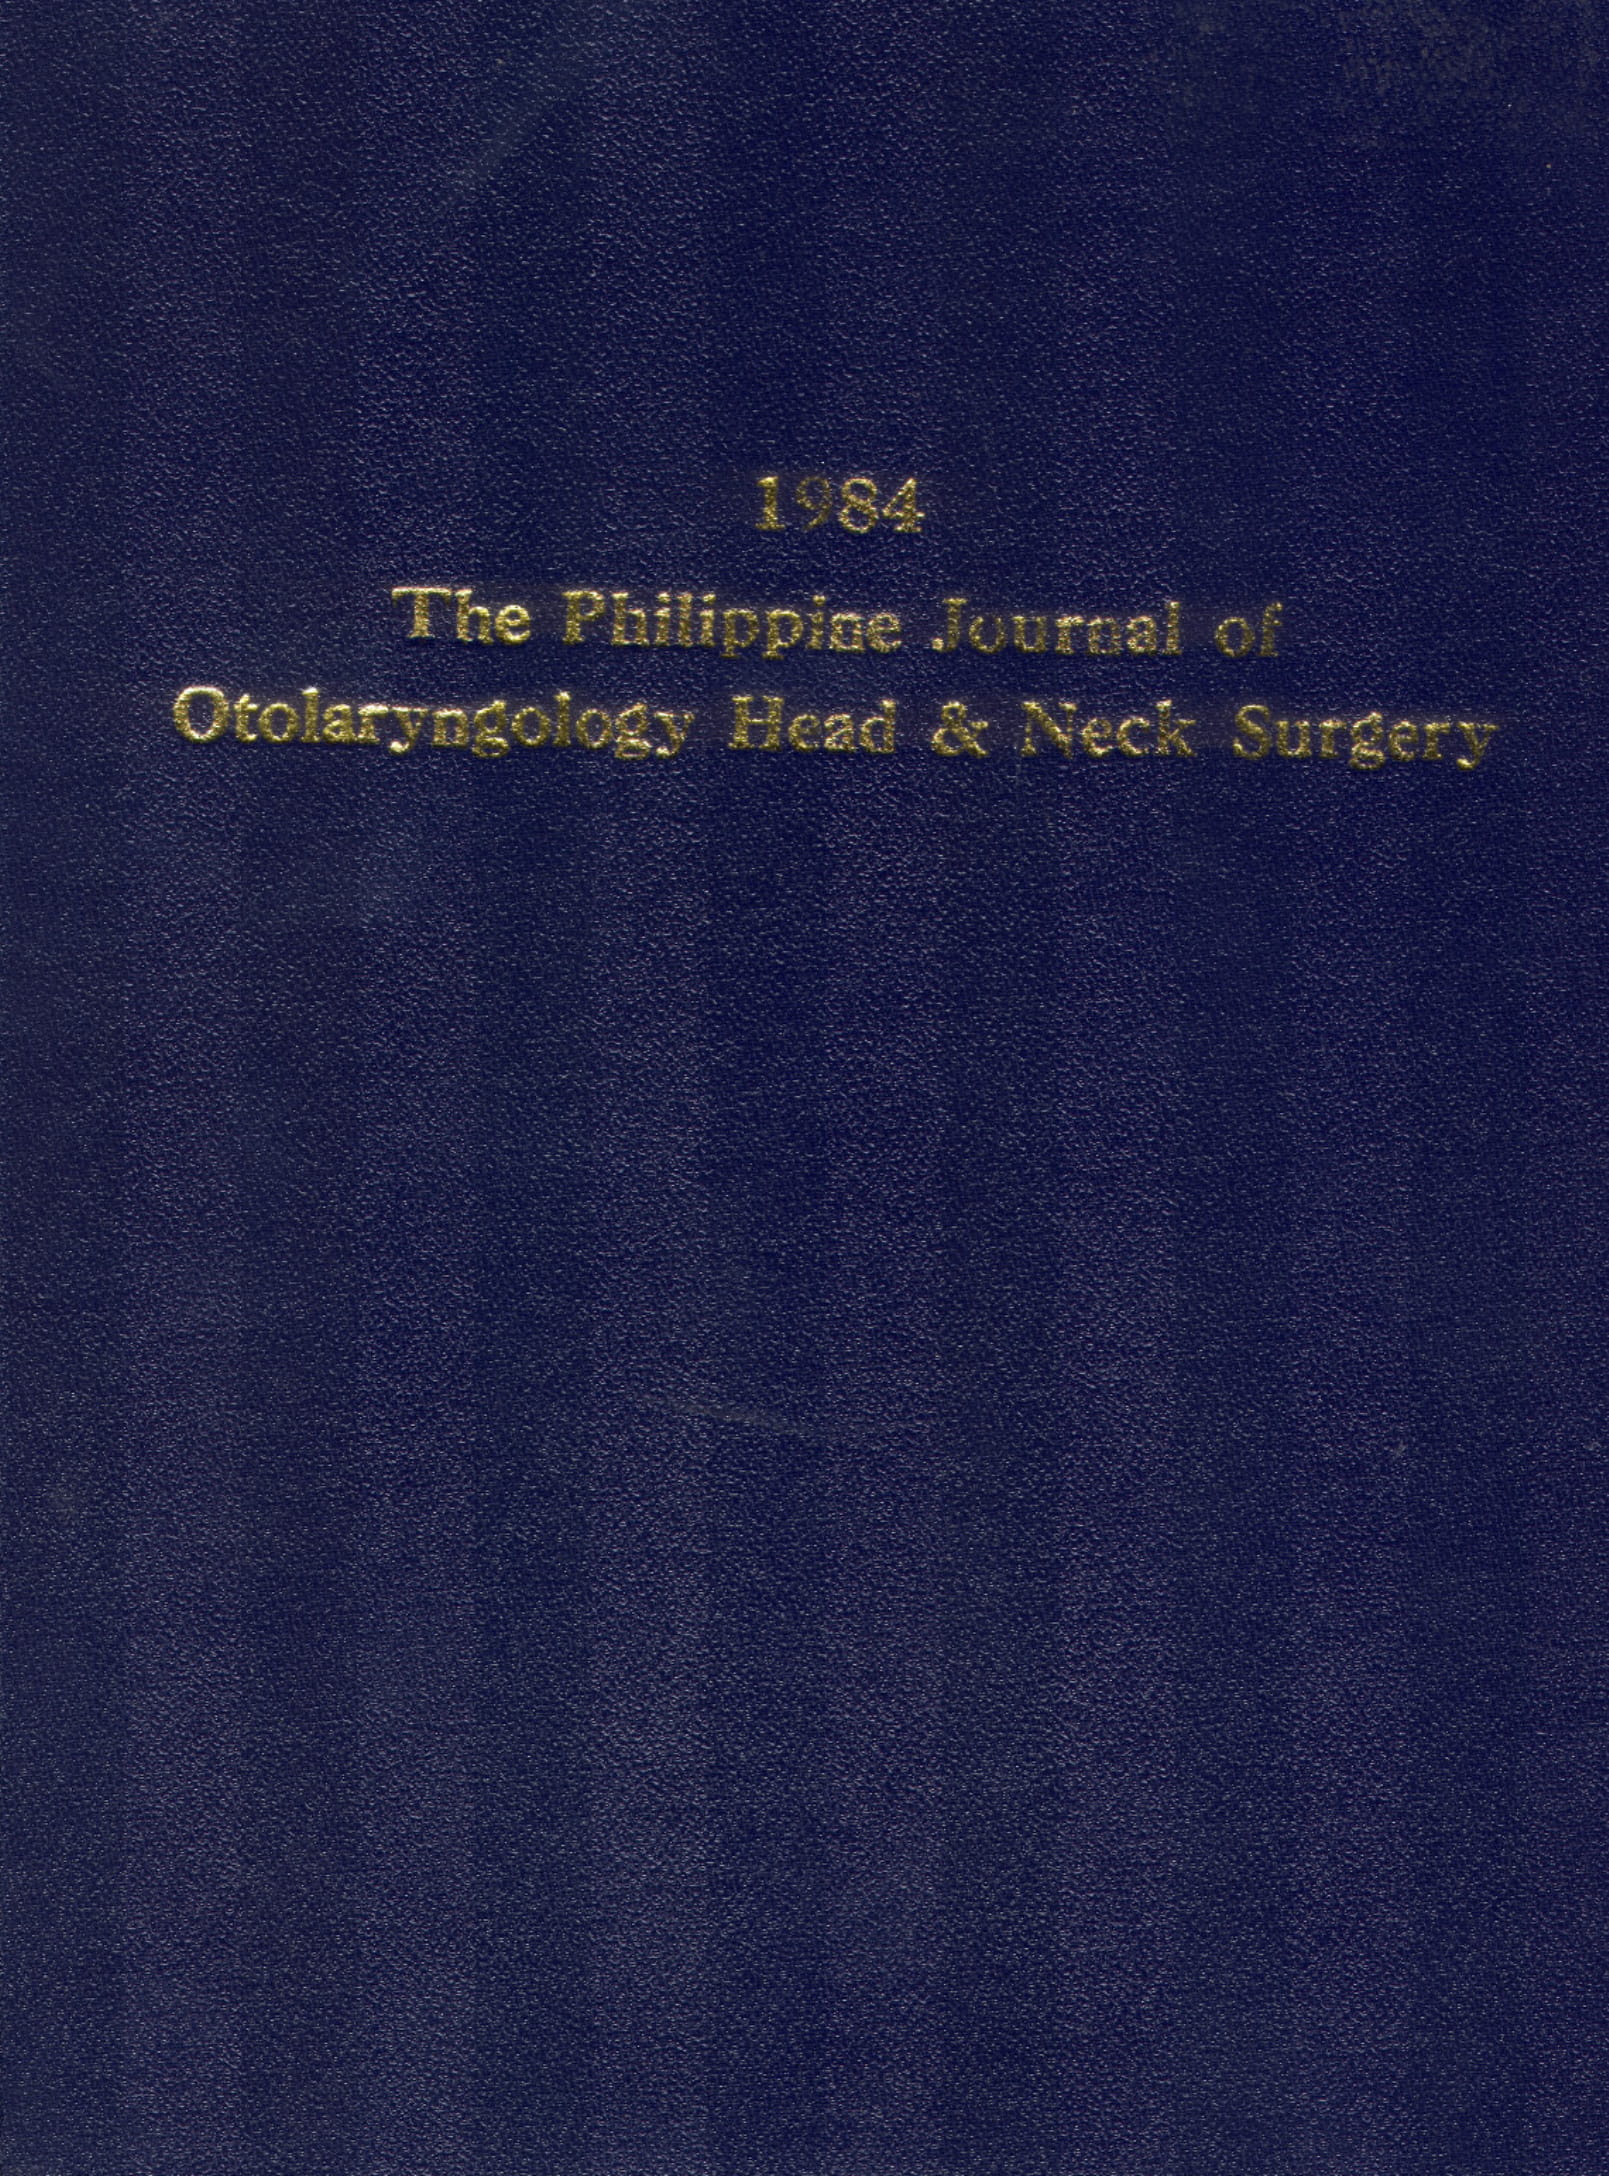 					View 1984: Philippine Journal of Otolaryngology-Head and Neck Surgery
				